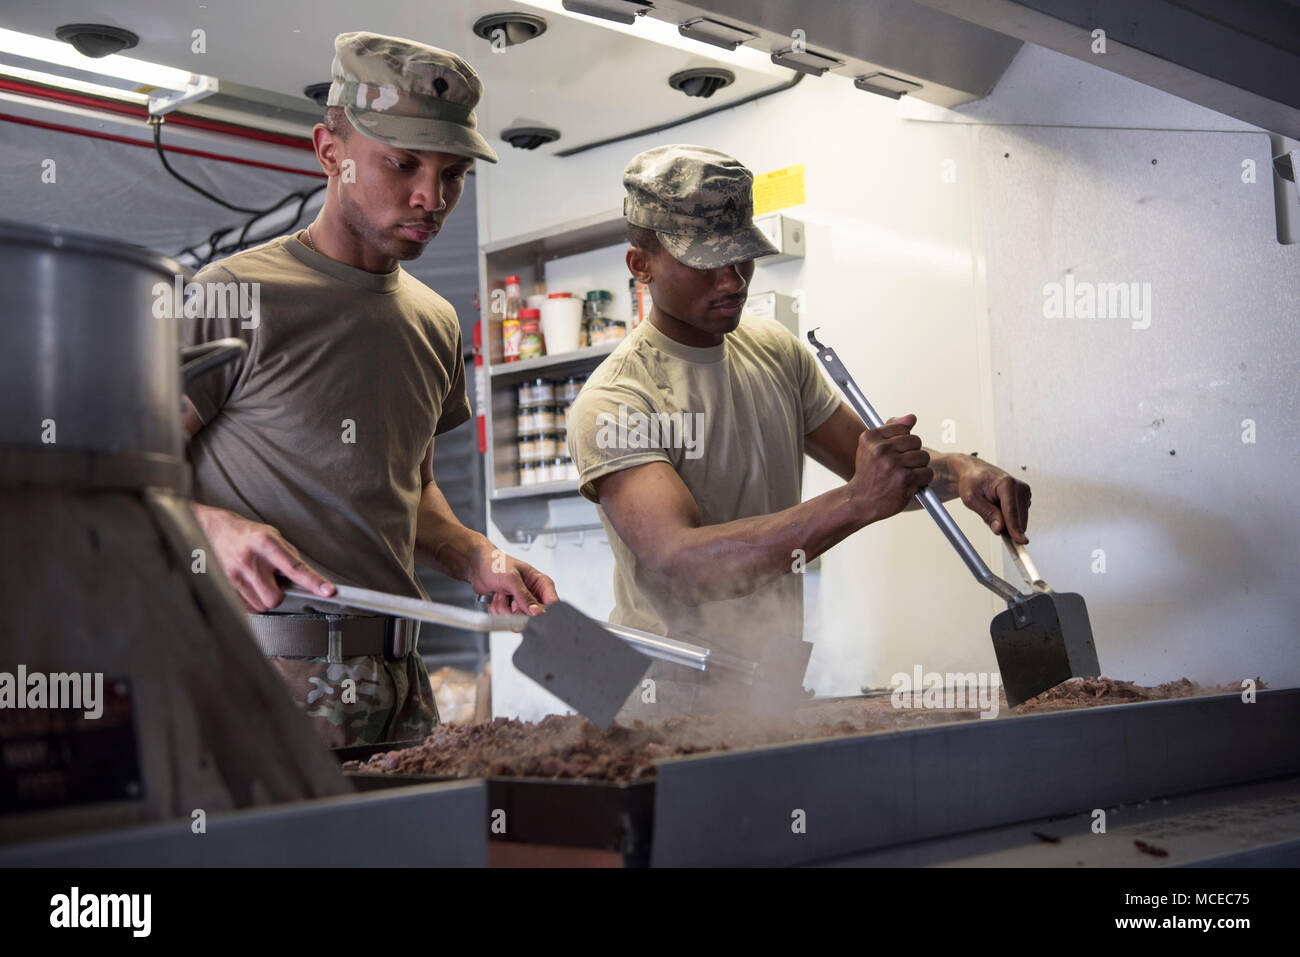 Spc. Joshua Richardson, culinary specialist, Headquarters and Headquarters Company, 113th Engineer Battalion, Indiana Army National Guard, and Sgt. Raymond Elliott, Bravo Co., 218th Brigade Support Battalion, South Carolina Army National Guard, prepare dinner for Soldiers at Jennings County Fairgrounds, North Vernon, Indiana, during Vibrant Response 2018, April 11. U.S. Army North conducts Exercise Vibrant Response annually as part of its mission to train the nation's military CBRN response capability.(U.S. Army photo by Staff Sgt. Jerry Boffen, 108th Public Affairs Detachment) Stock Photo